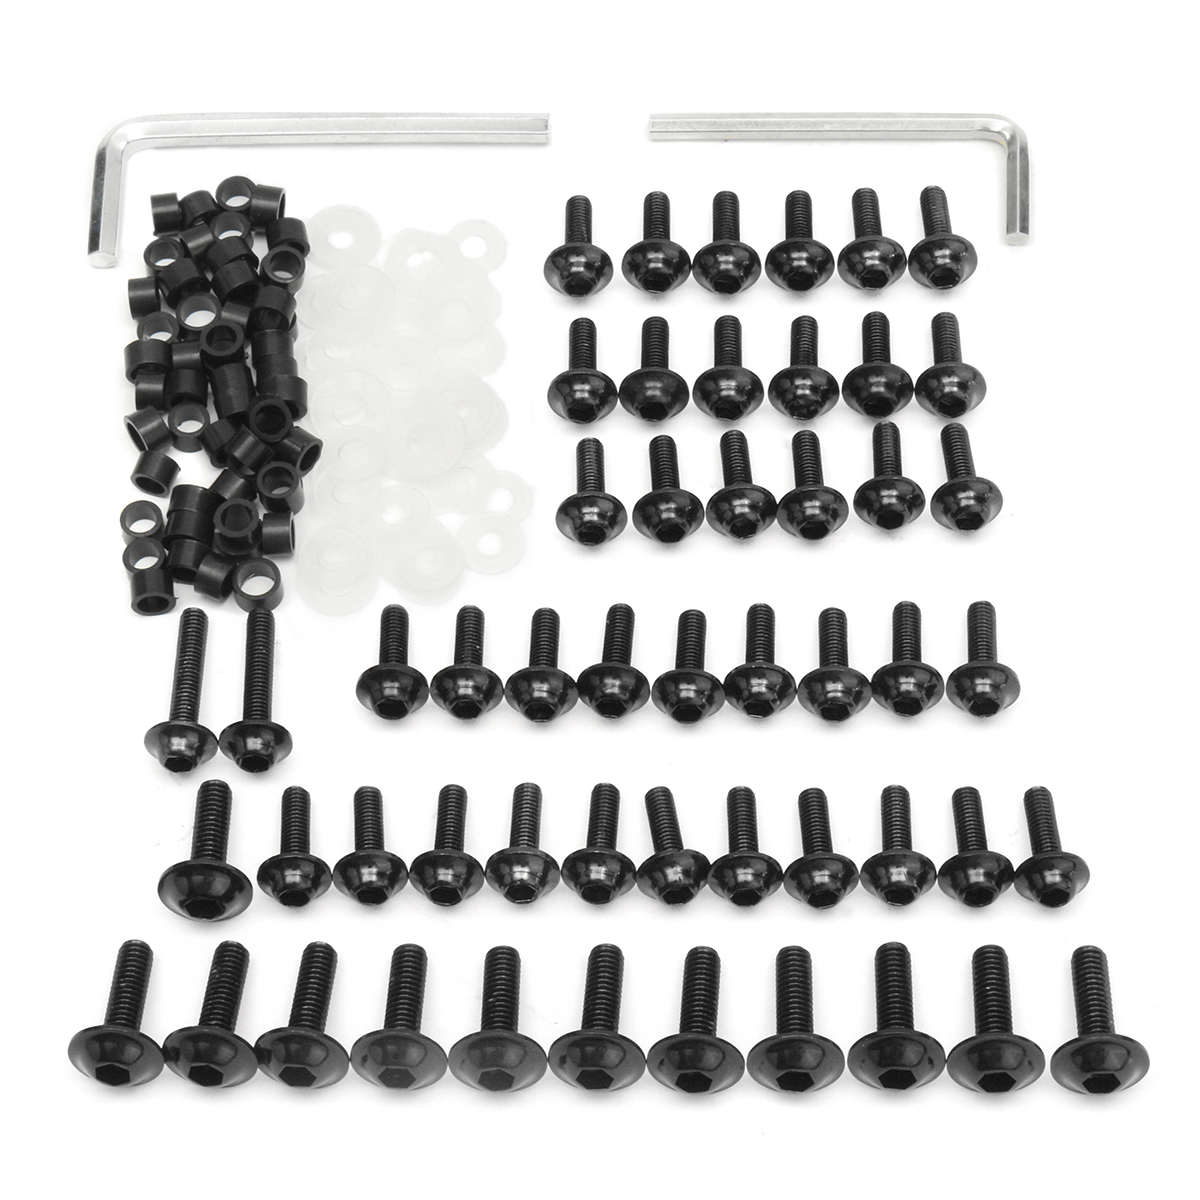 Motorcycle Fairing Bolts Kit Fastener Clips Screw For Yamaha YZF R6 1999 2000 2001 2002